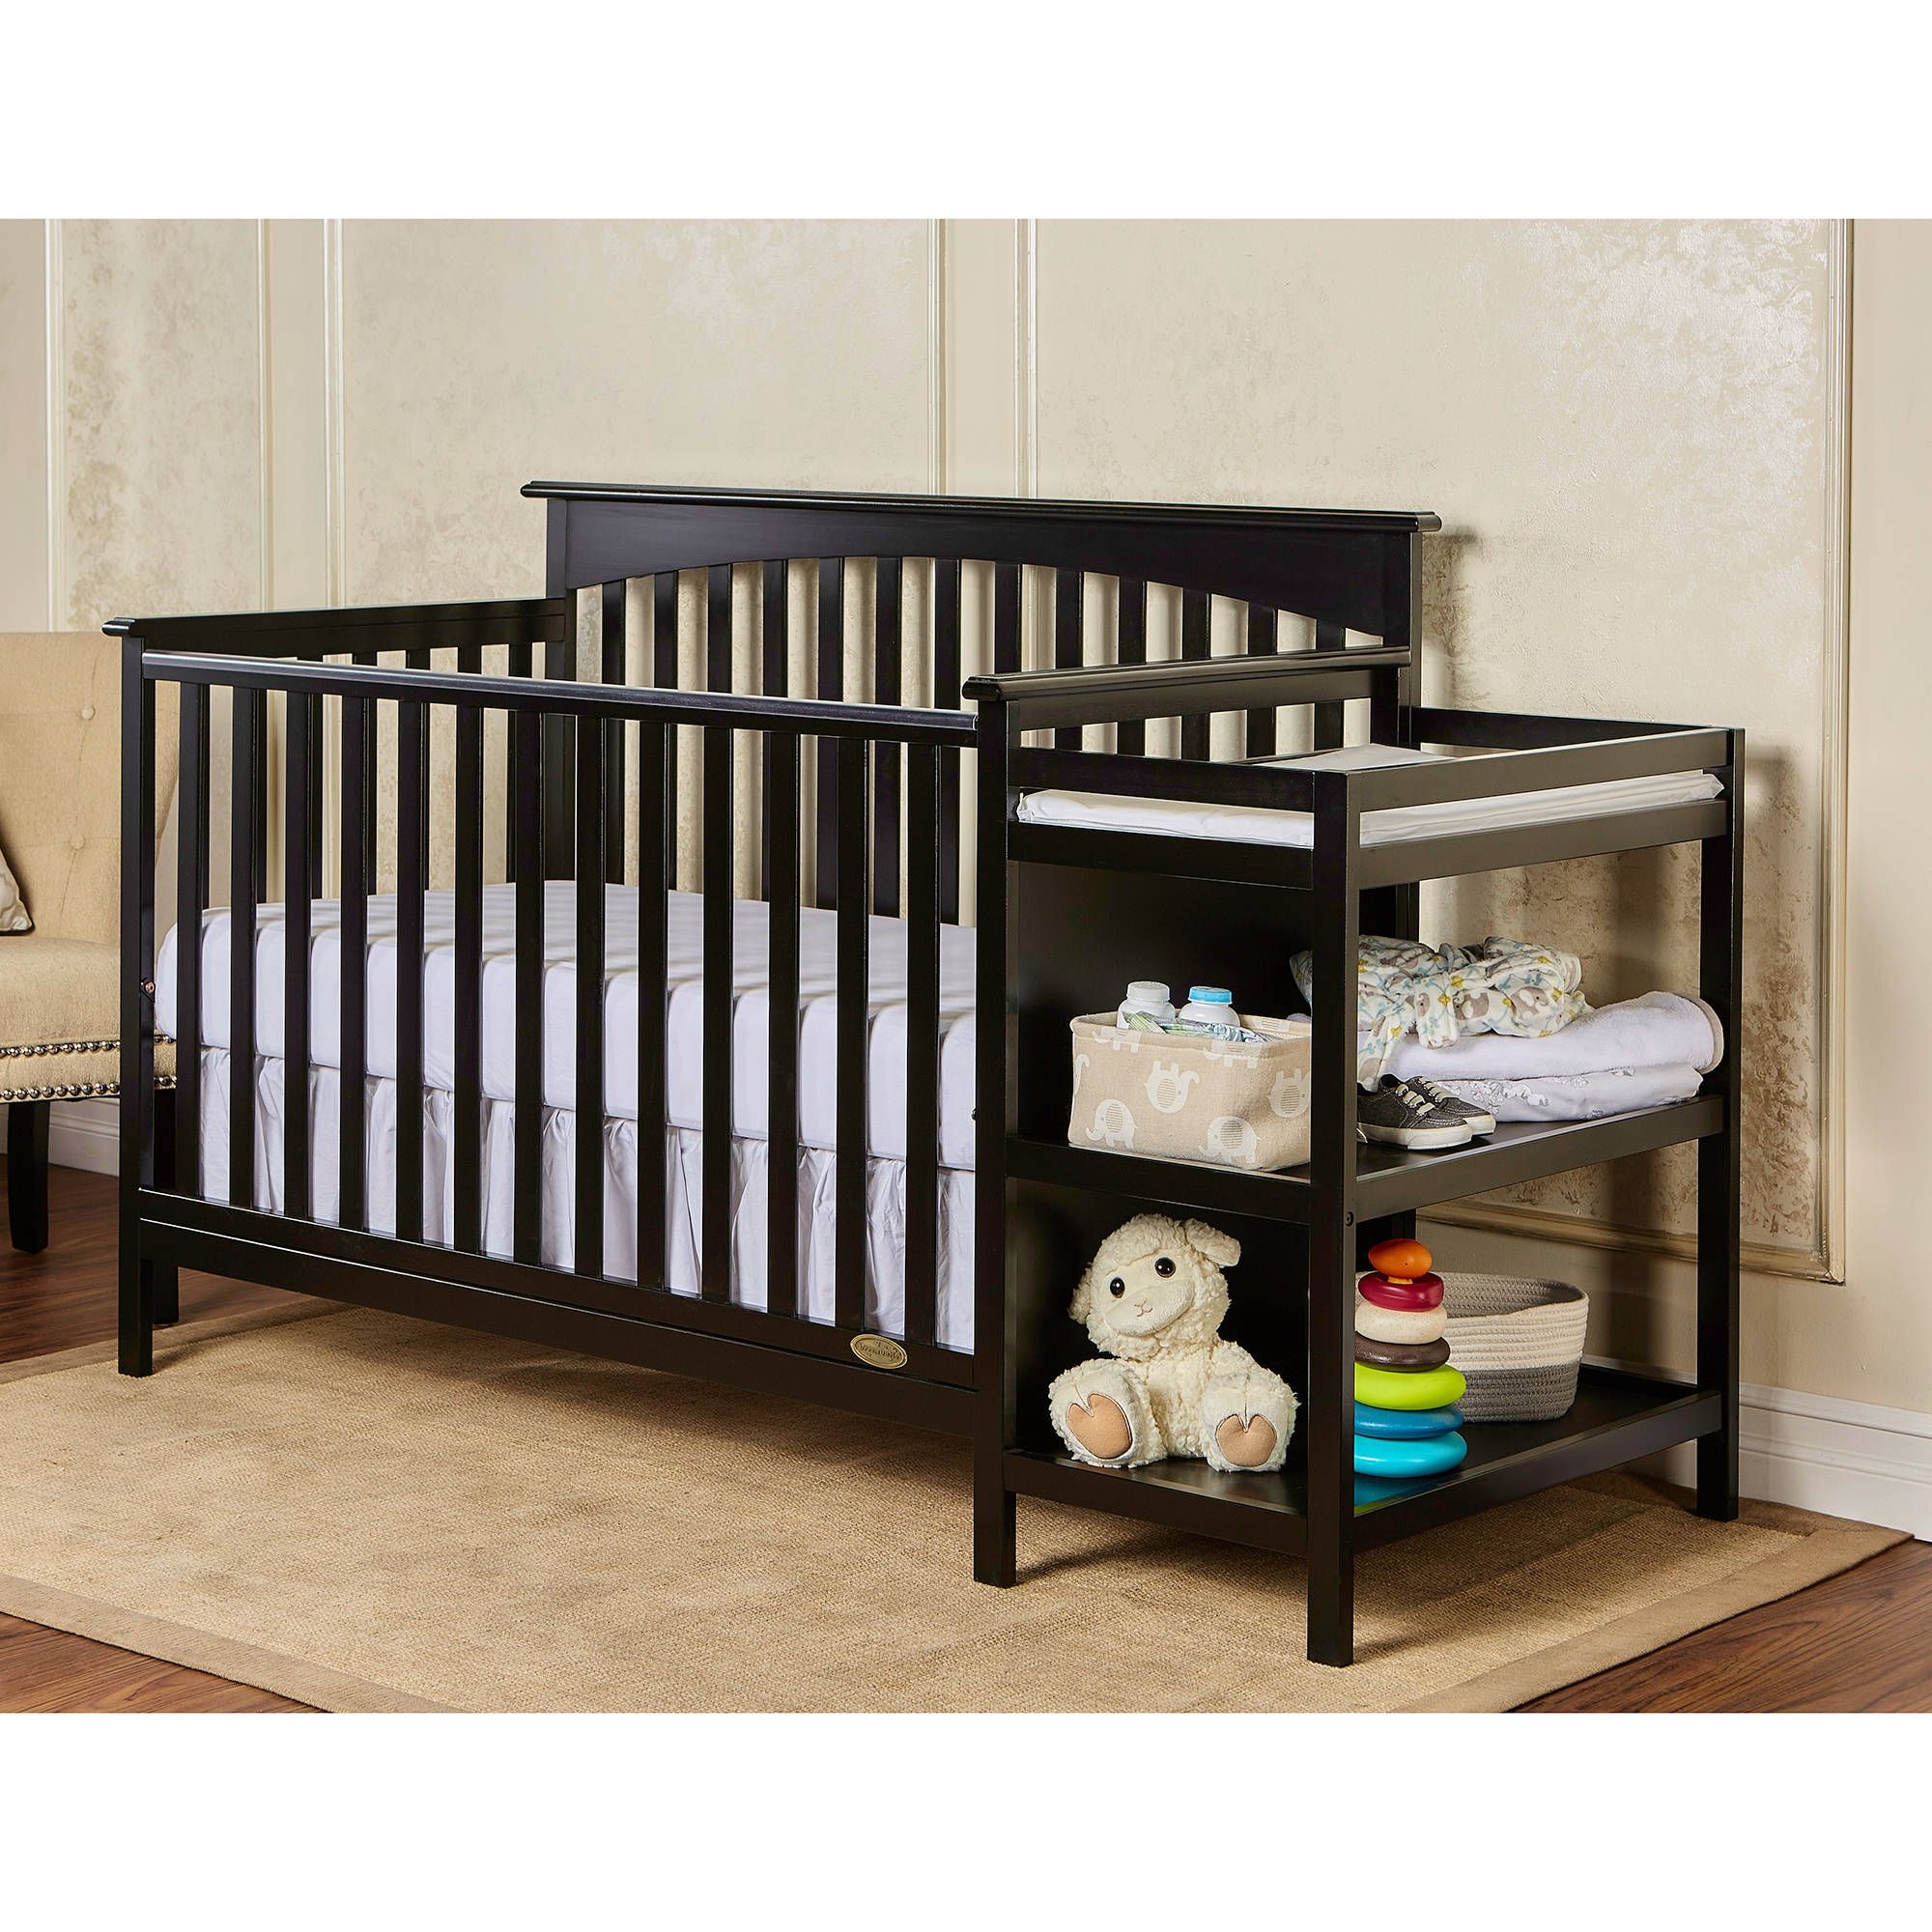 convertible crib and changing table set